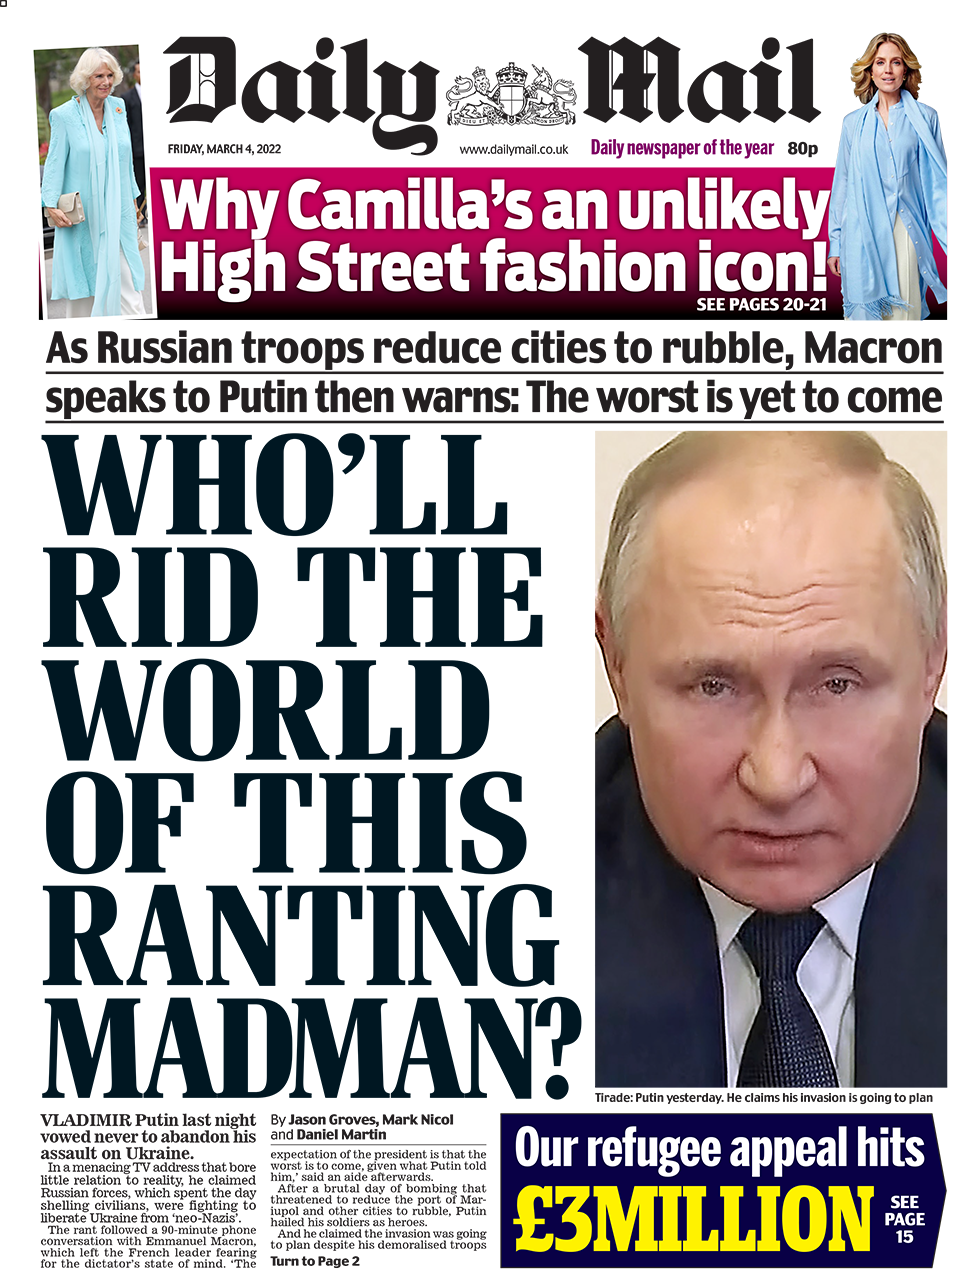 Daily Mail front page 04/03/22